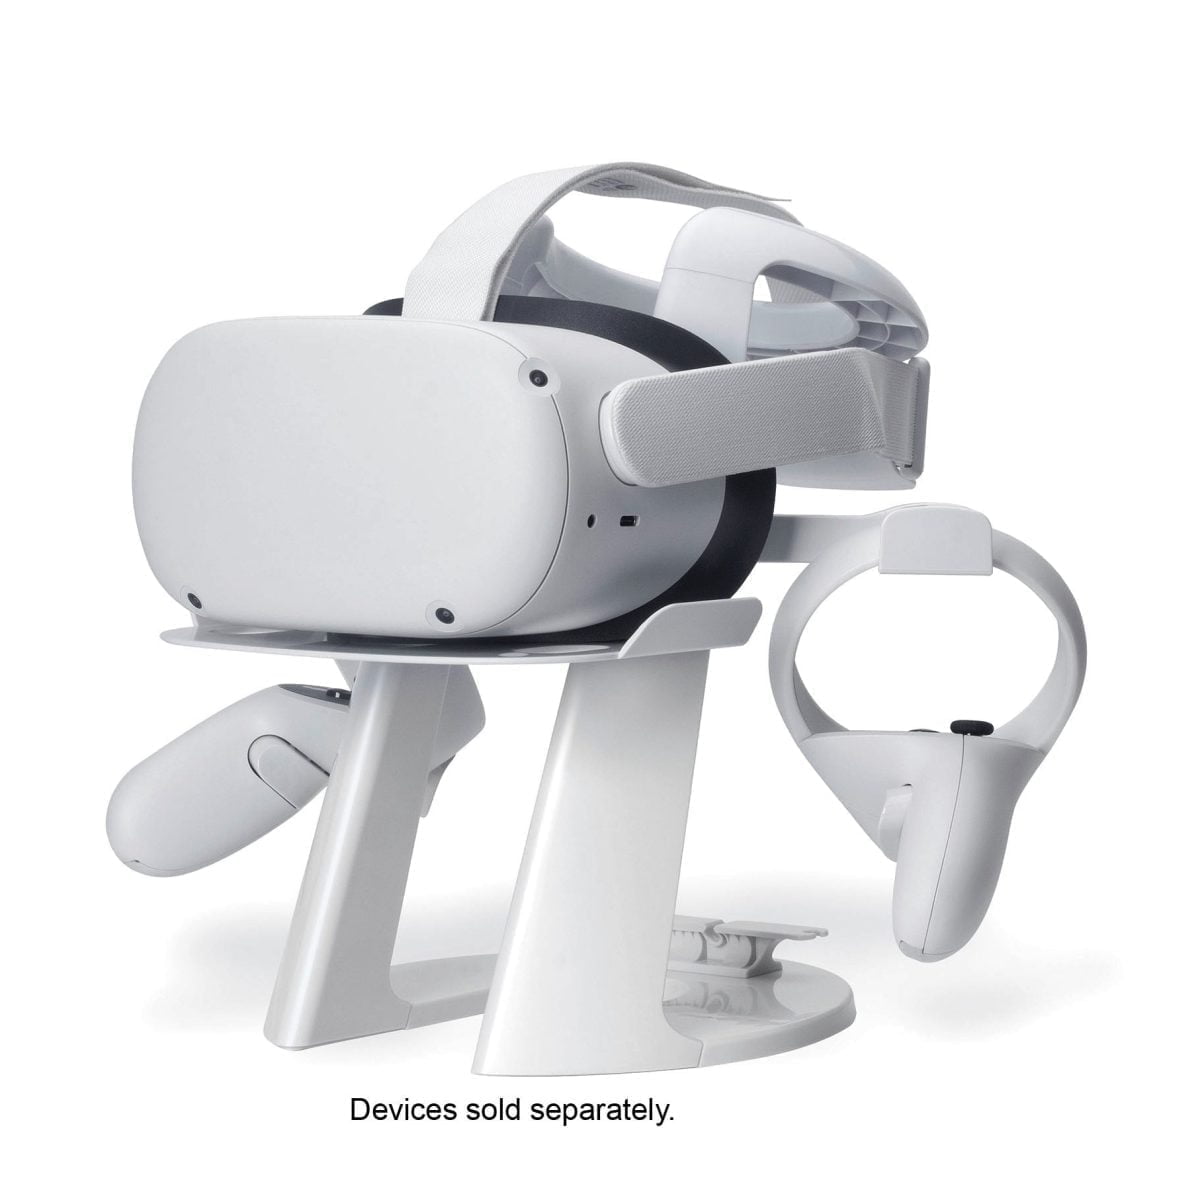 6473847Cv11D &Amp;Lt;H1&Amp;Gt;Stand For Oculus - White&Amp;Lt;/H1&Amp;Gt; The Insignia Oculus Stand Is Specially Designed For Displaying And Storing Your Oculus Vr Headset And Touch Controllers. Built With A No-Slip Base, This Stand Is A Safe And Stable To Place To Store And Organize Your Vr Headset, Controllers And Cables. Compatible With Most Vr Systems Including The Oculus Series (Oculus Rift/Rift S/Quest/Quest 2) Vr Headset And Controllers Oculus Stand Insignia Stand For Oculus - White